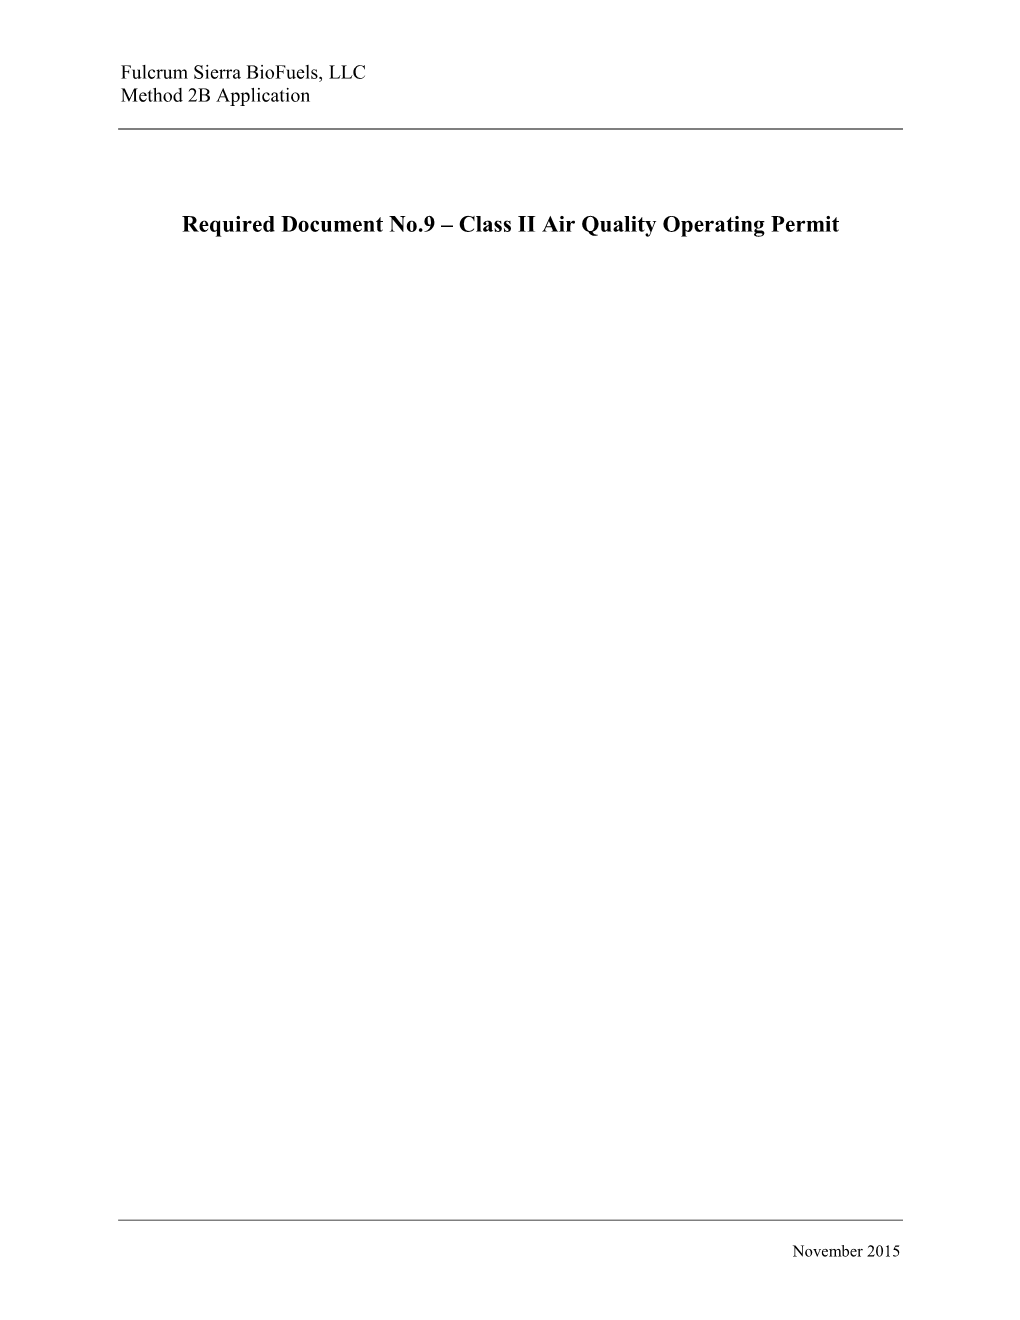 Required Document No.9 – Class II Air Quality Operating Permit